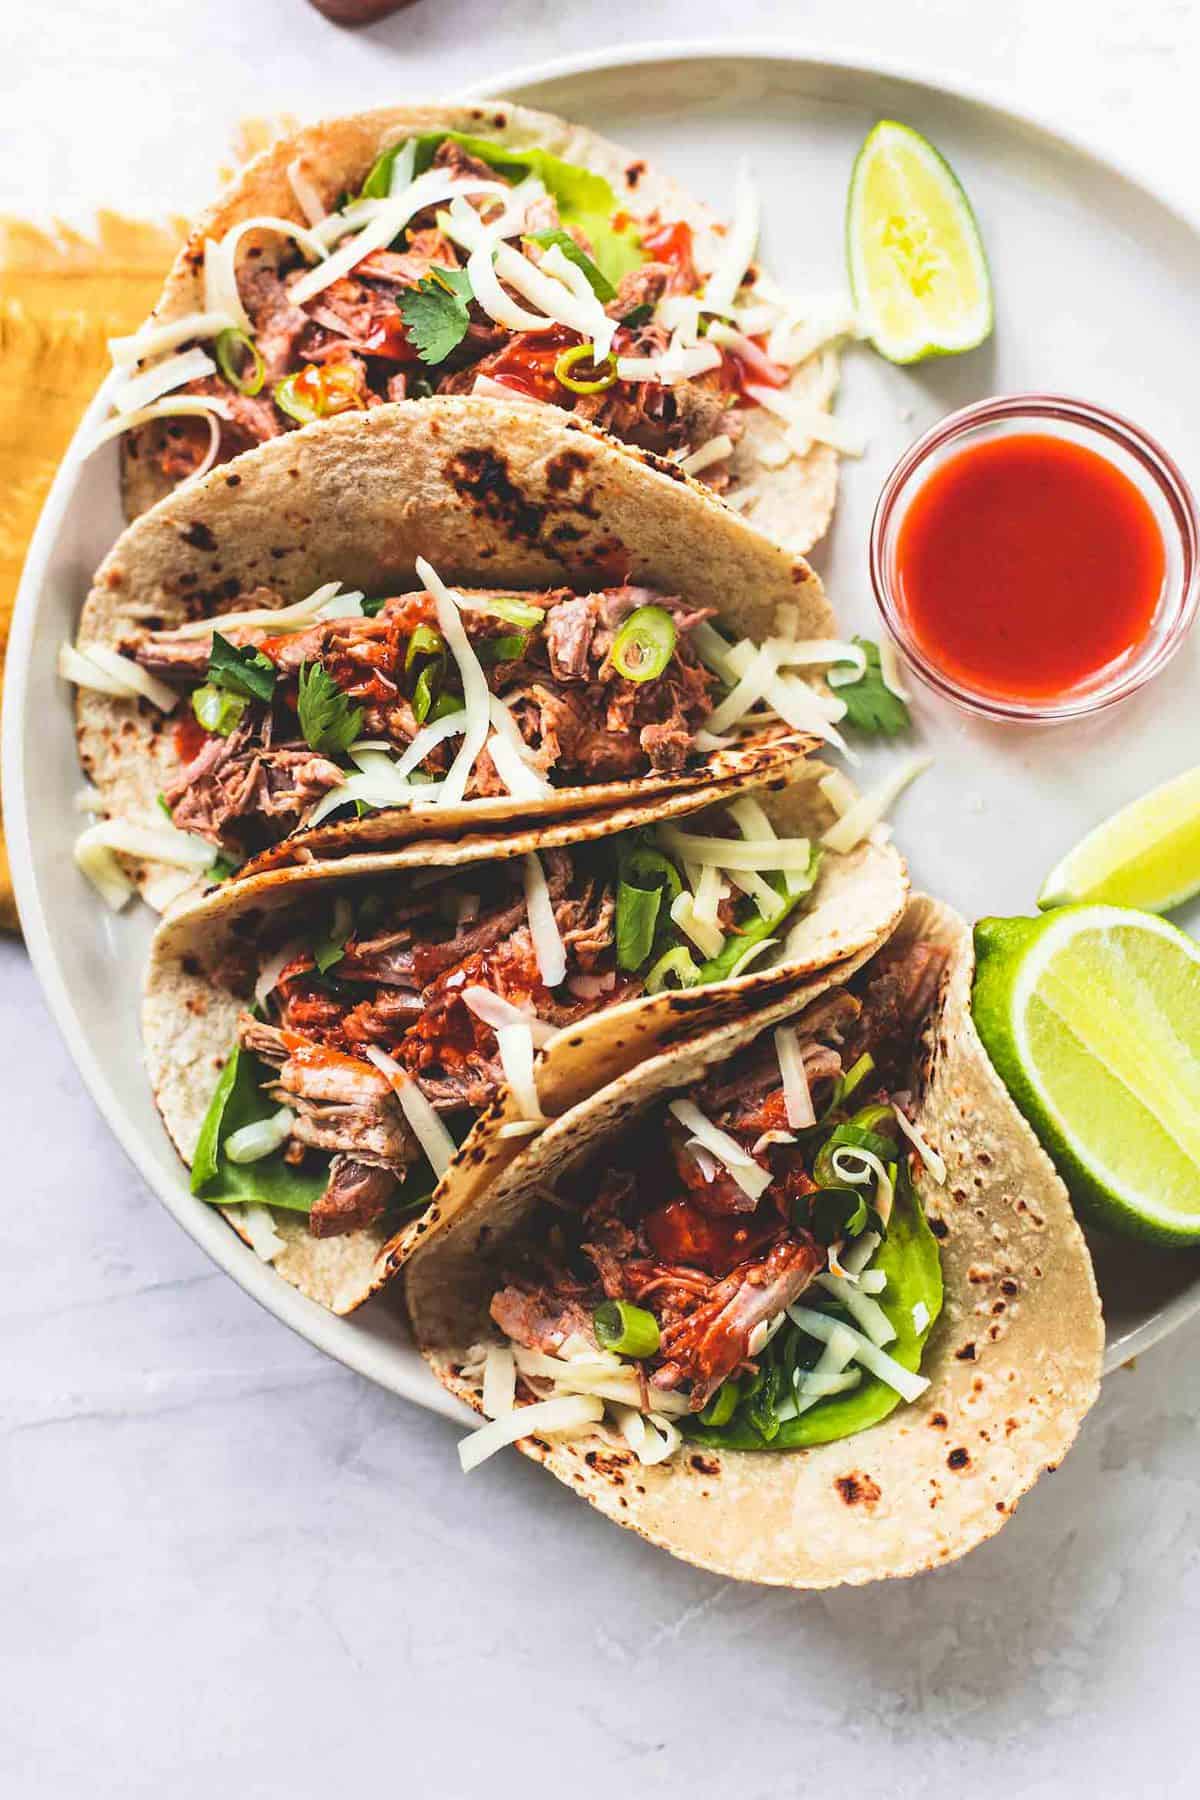 Slow Cooker Pulled Pork Tacos – The Dirty Gyro